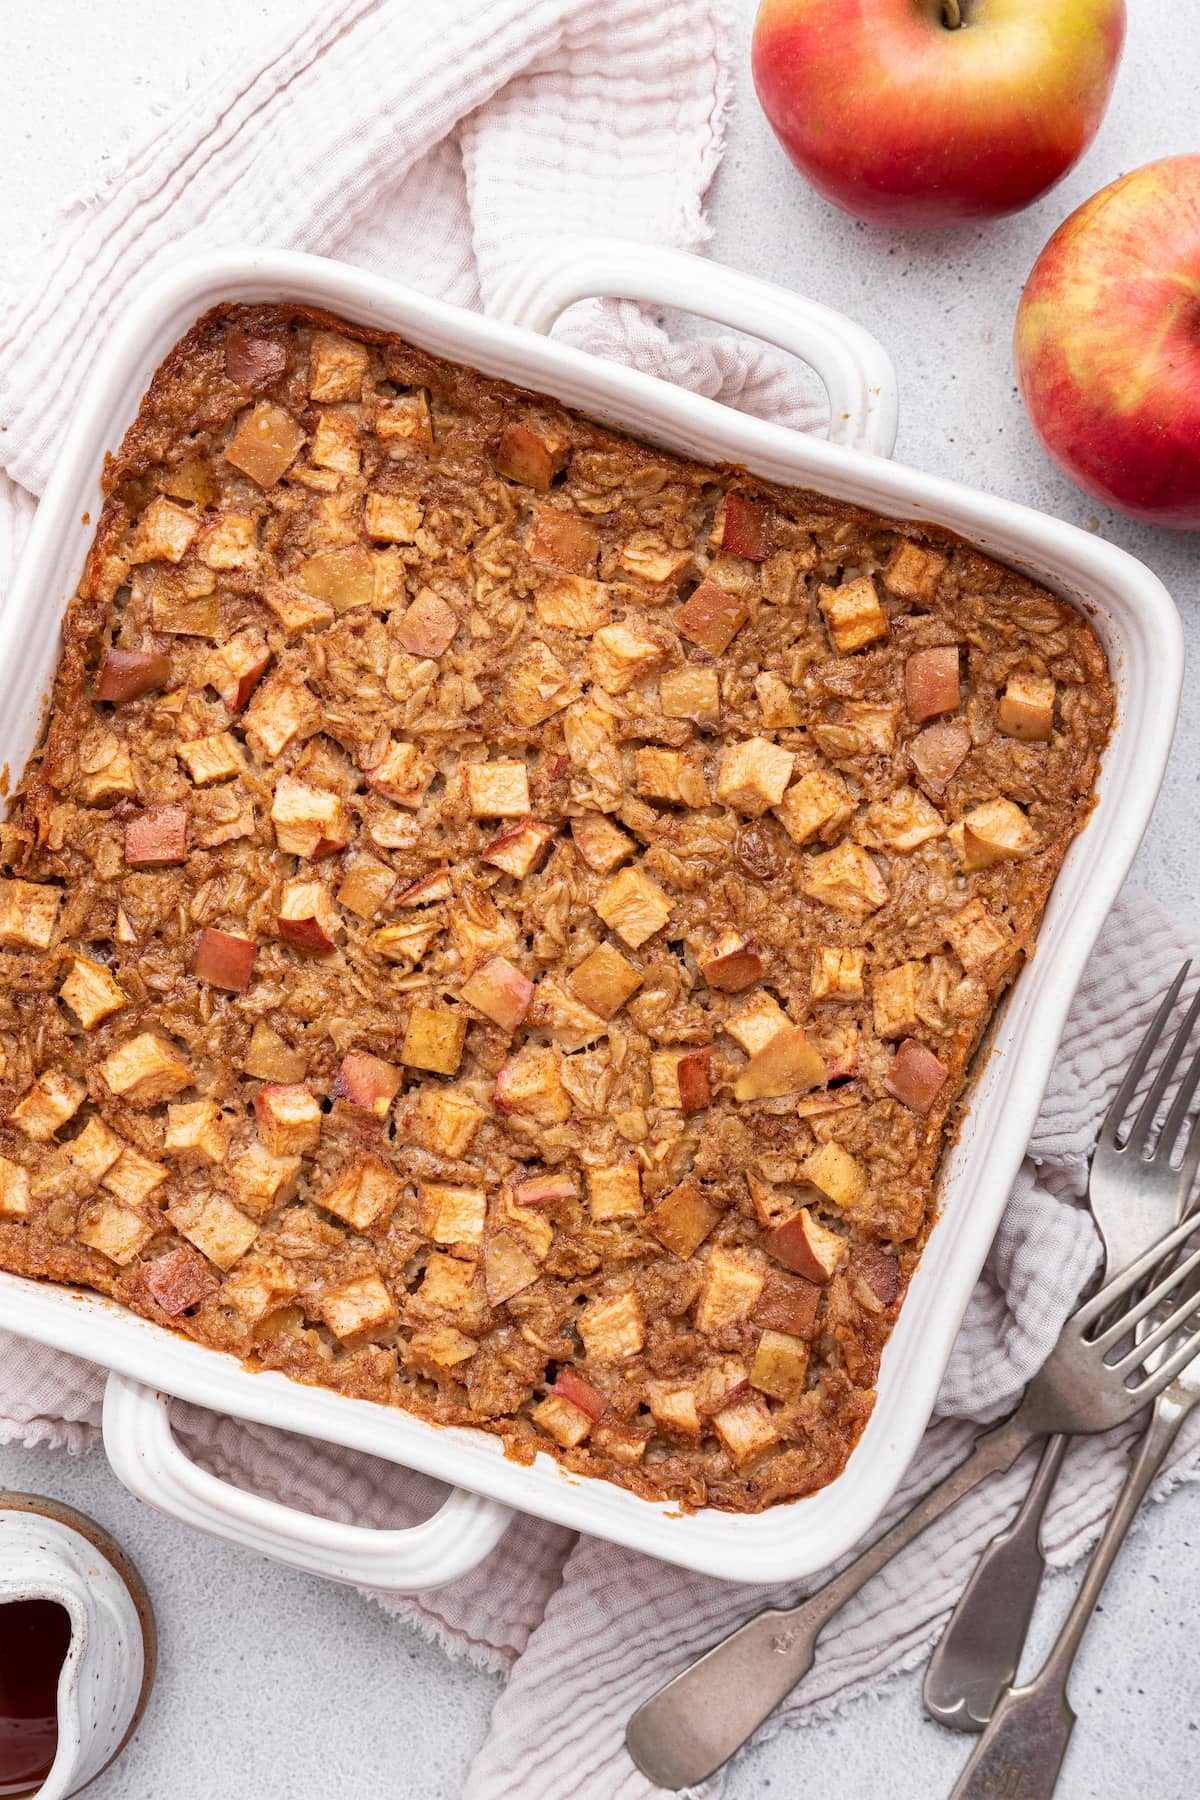 Apple cinnamon baked oatmeal in a square baking dish.